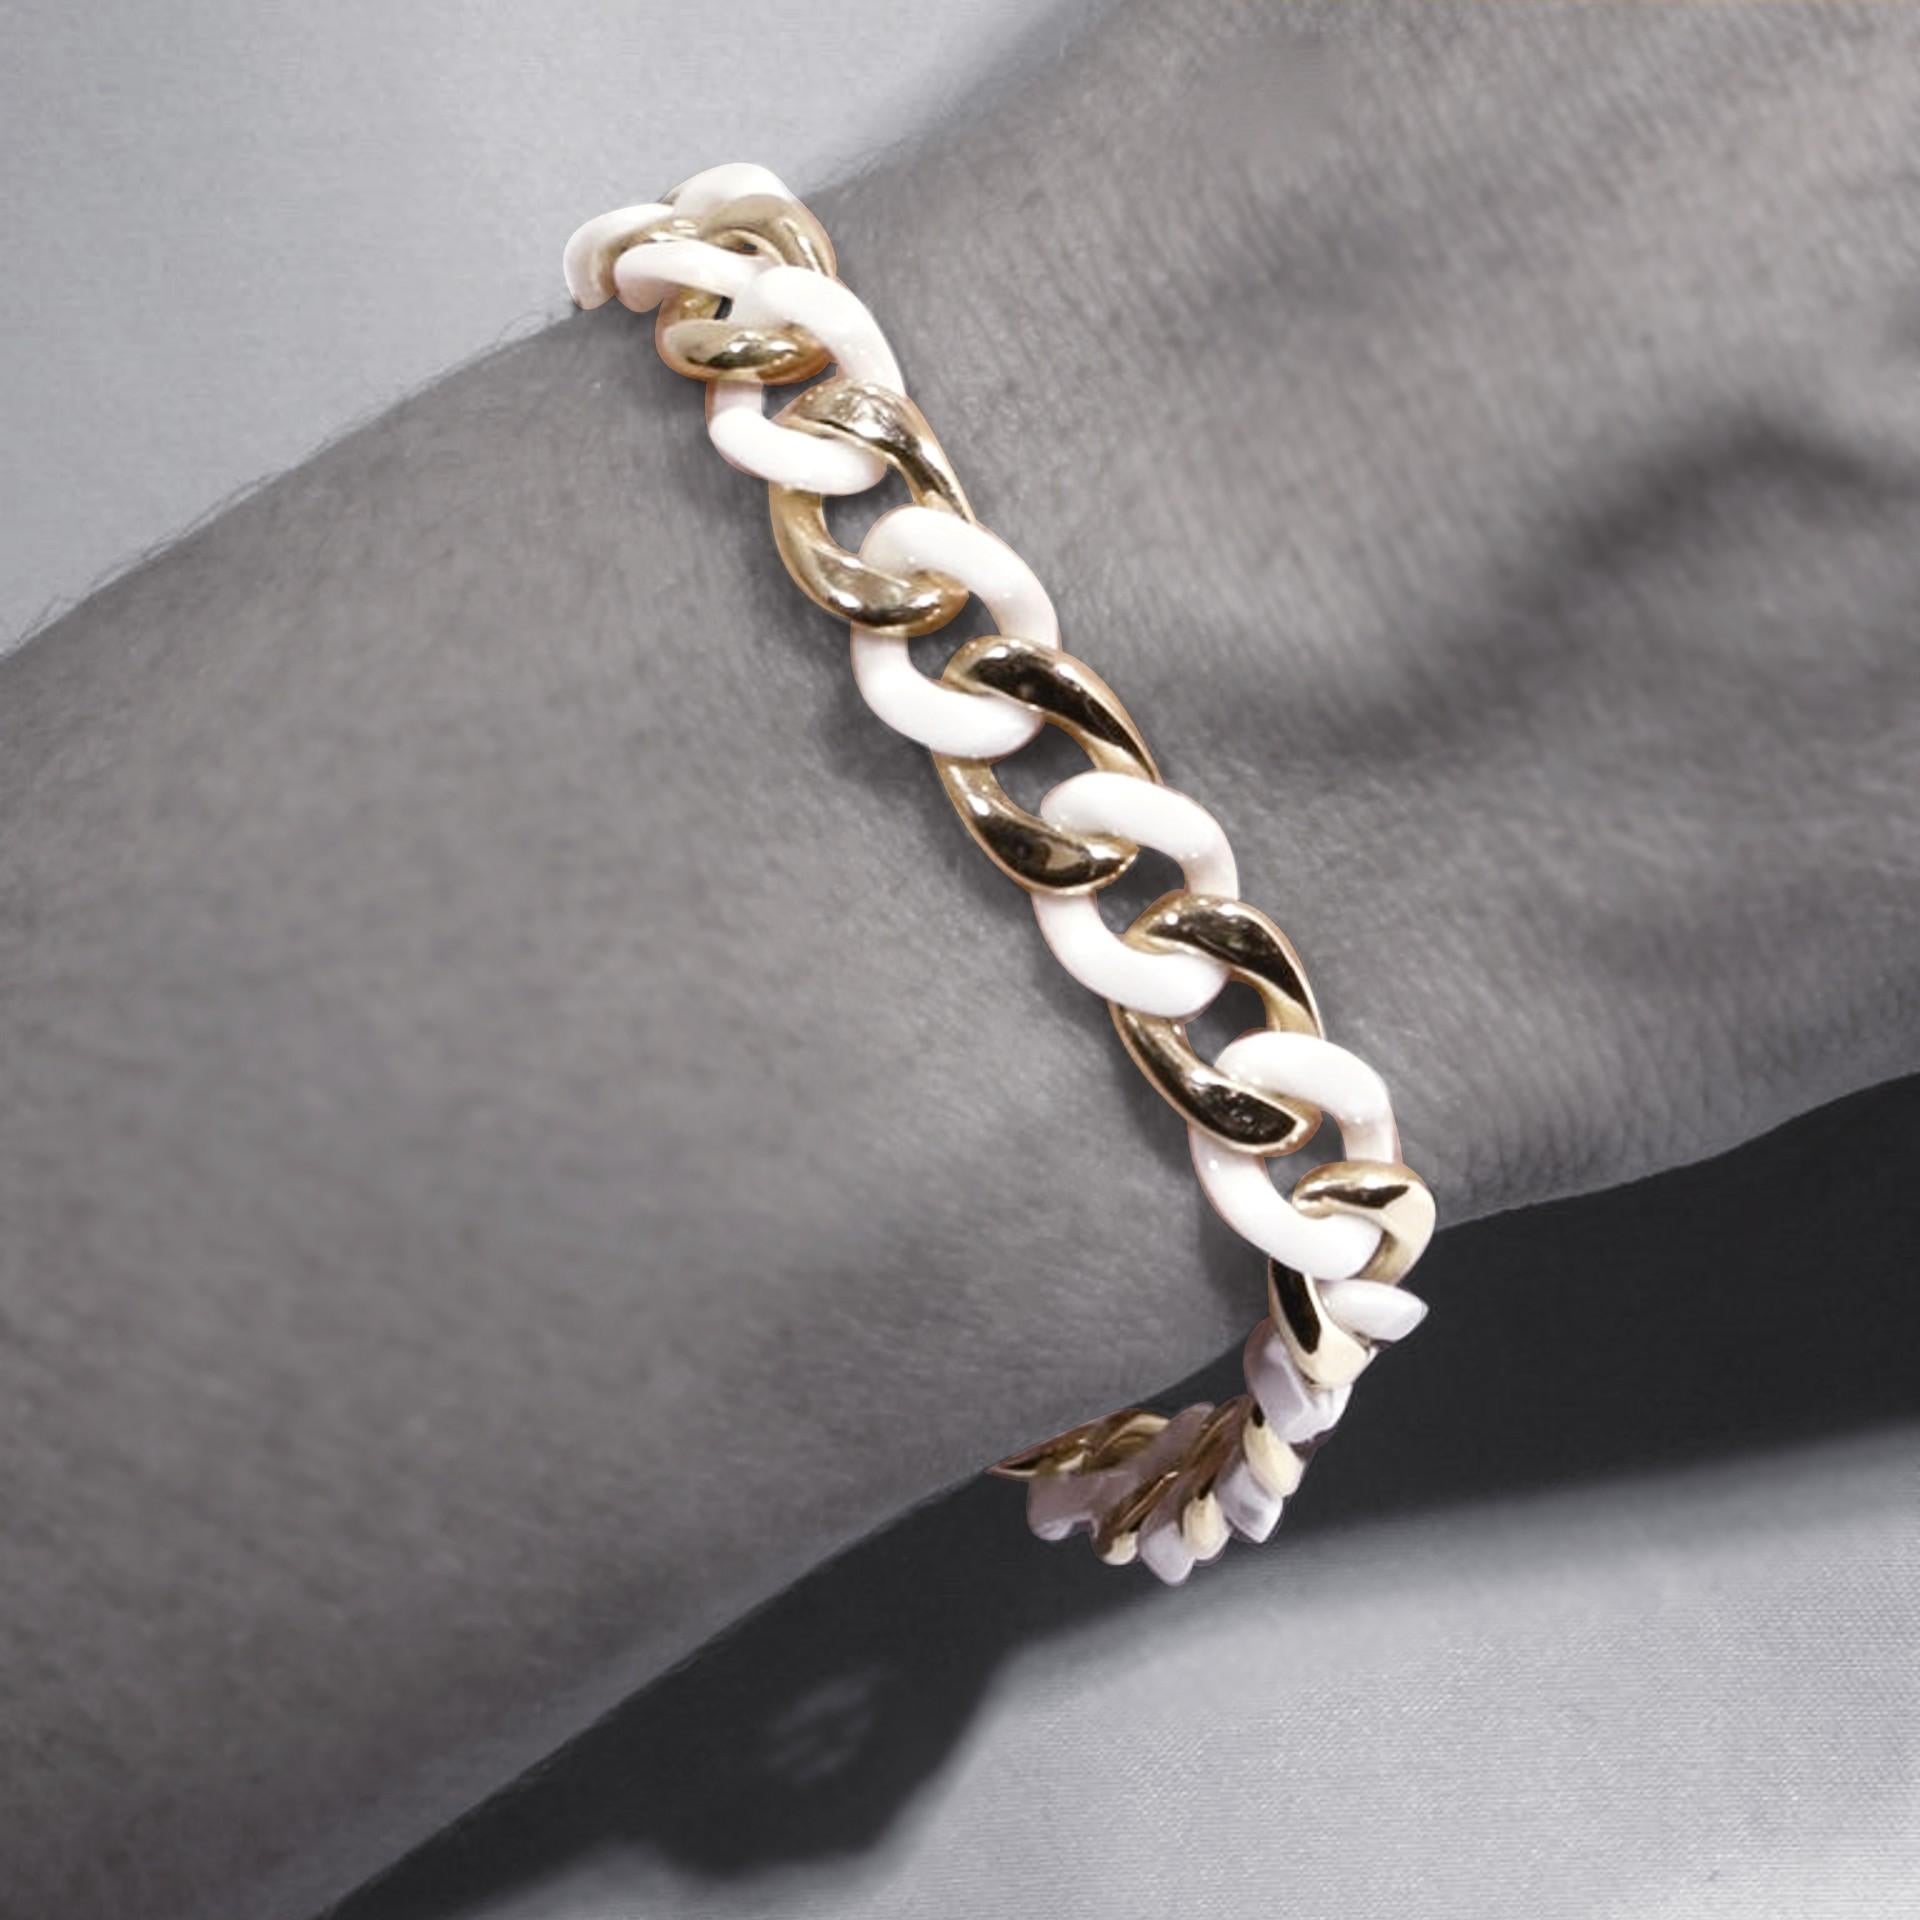 Alex Jona design collection, hand crafted in Italy, alternating 18k yellow gold and white high-tech ceramic curb-link bracelet. Dimensions: L= 19.0cm , H = 0.8cm, W =0.5cm , D = 0.3cm
With a hardness approaching that of diamond, high-tech ceramic is